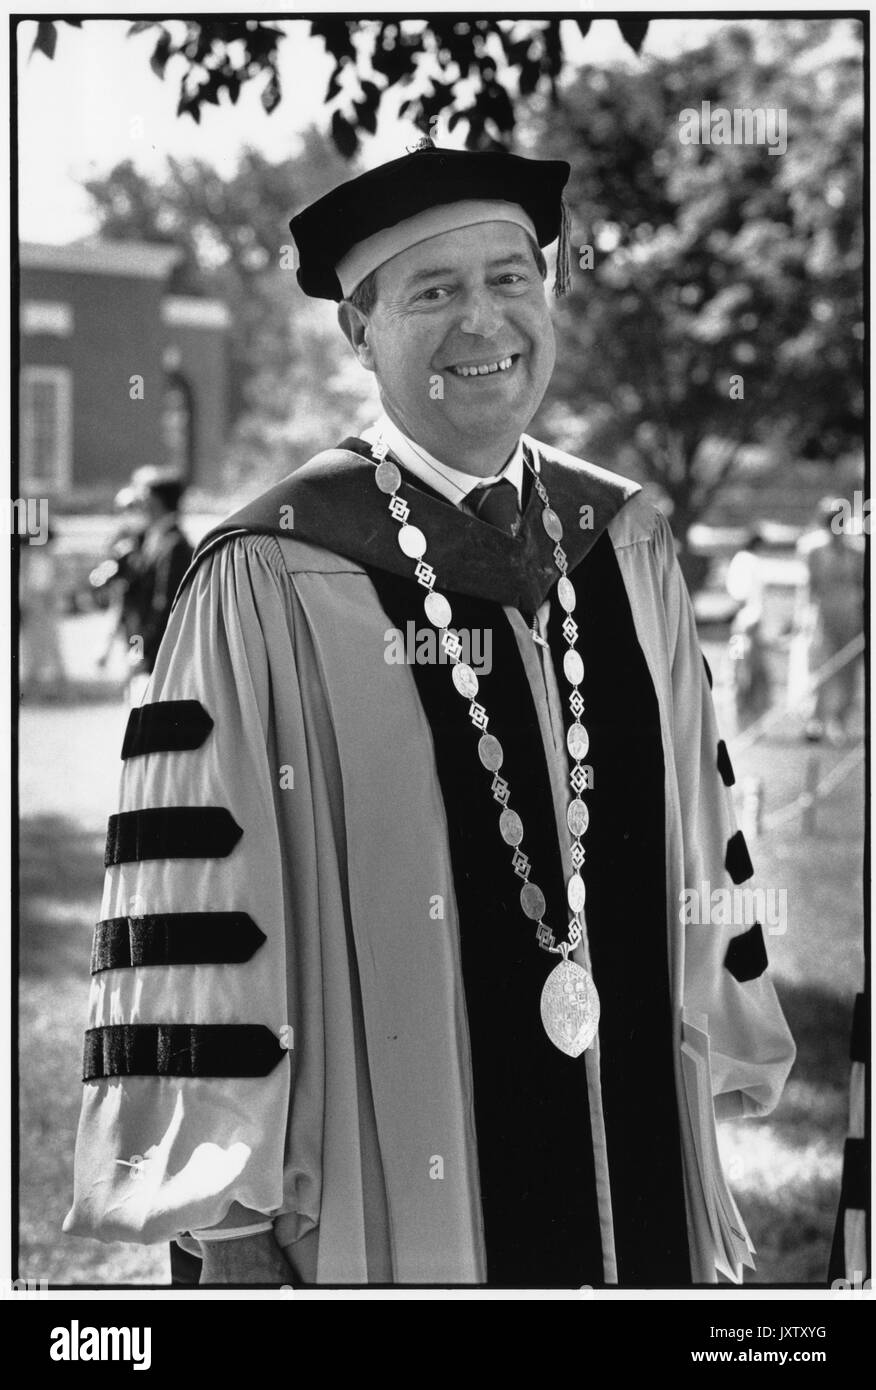 Steven Muller, Presidential Insignia, Commencement Portrait photograph, Taken outdoors during Commencement, Wearing full academic robes and the Presidential Insignia, 1989. Stock Photo